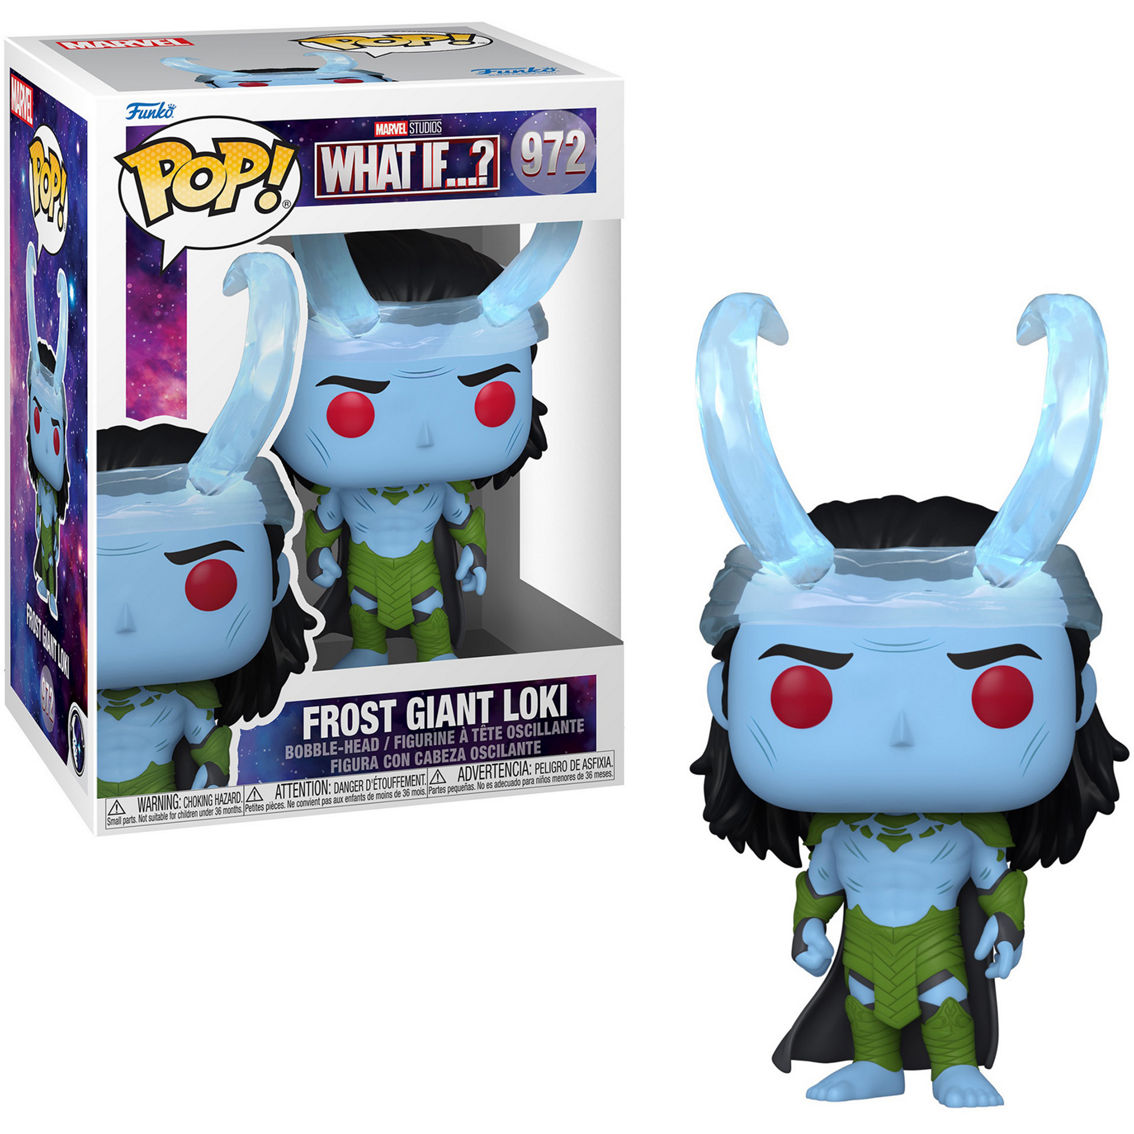 Funko POP! Marvel What If? Infinity Ultron Collectors' Set - Image 4 of 8